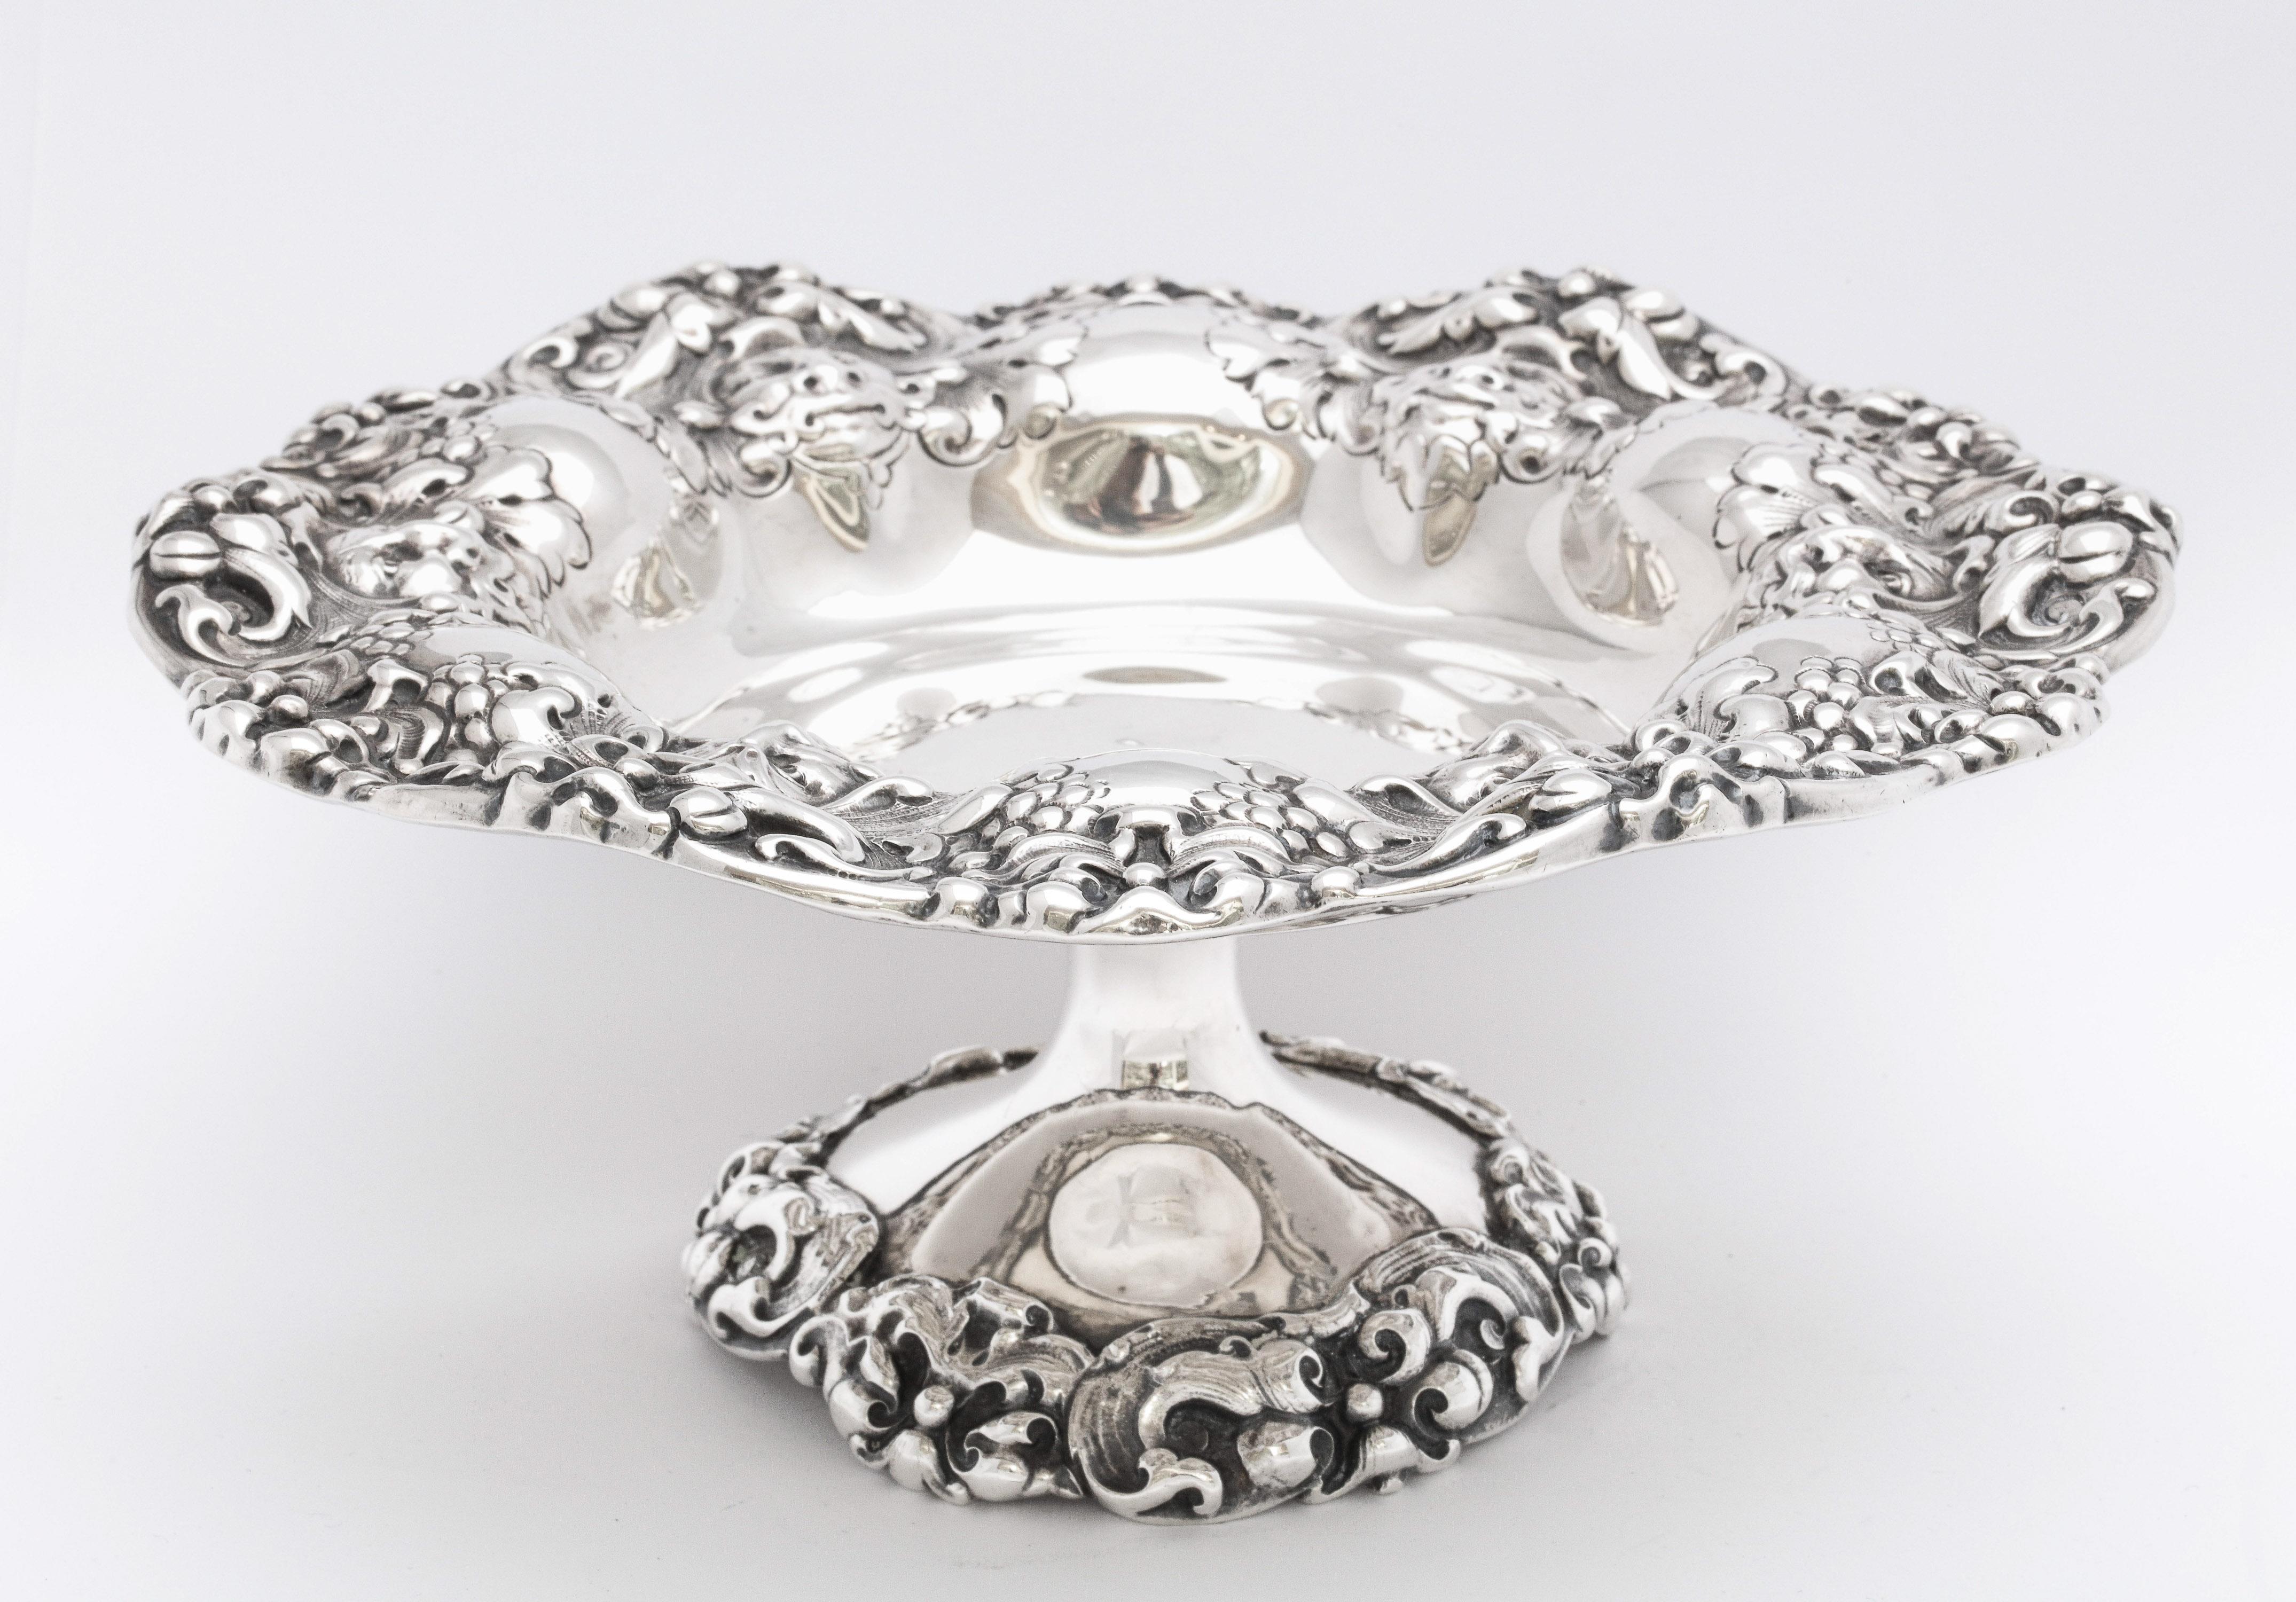 American Neoclassical Style, Victorian Period Sterling Silver Tazza by Gorham For Sale